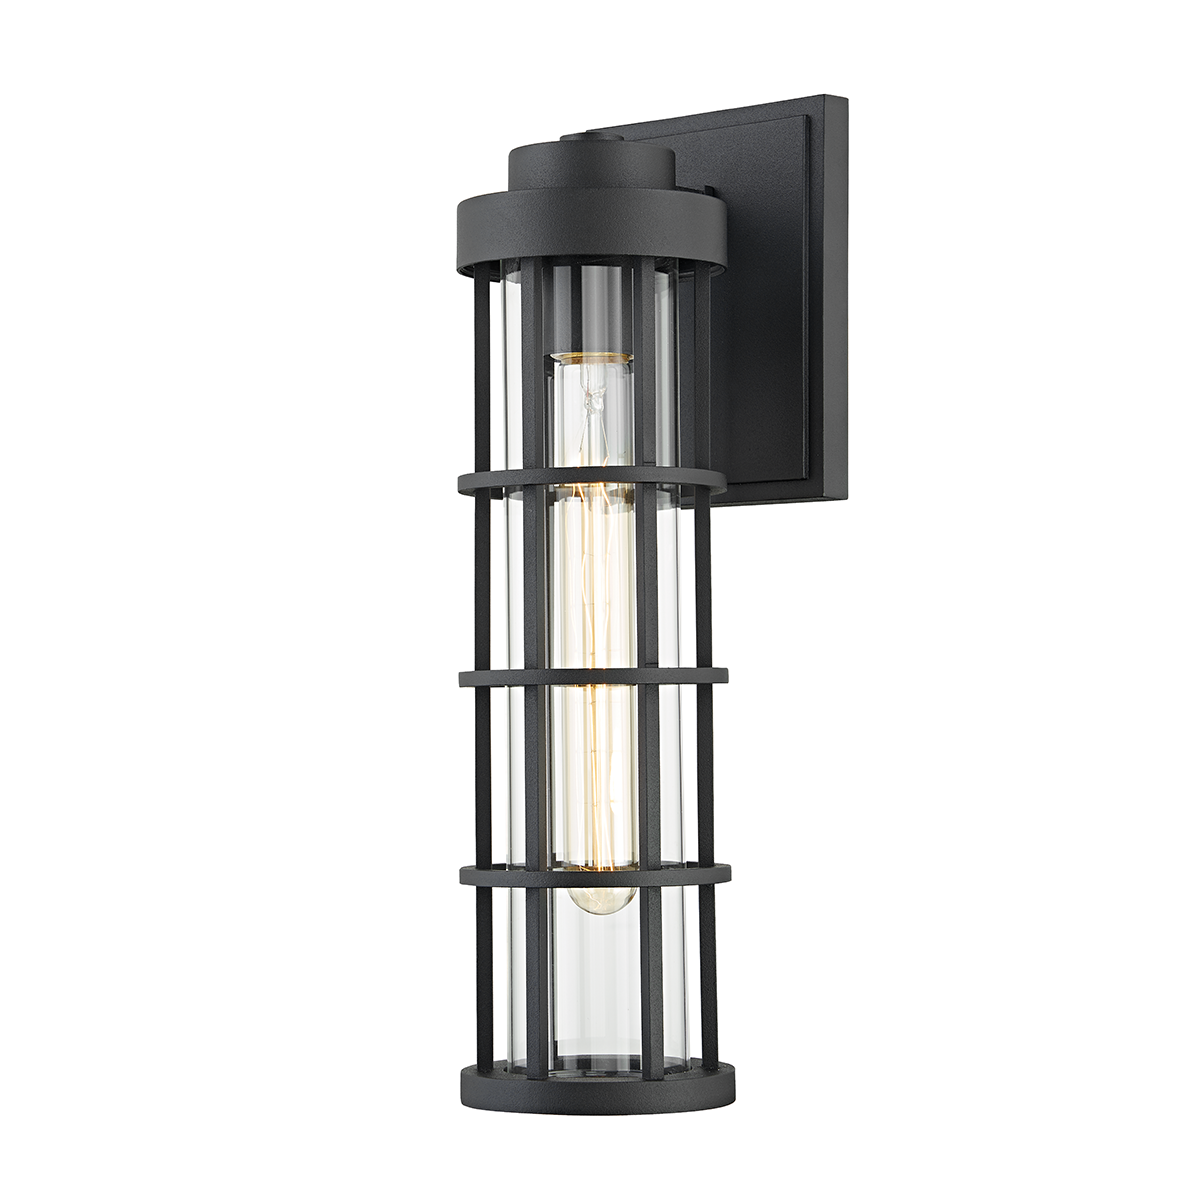 Troy MESA 1 LIGHT LARGE EXTERIOR WALL SCONCE B2042 Outdoor l Wall Troy Lighting TEXTURE BLACK  